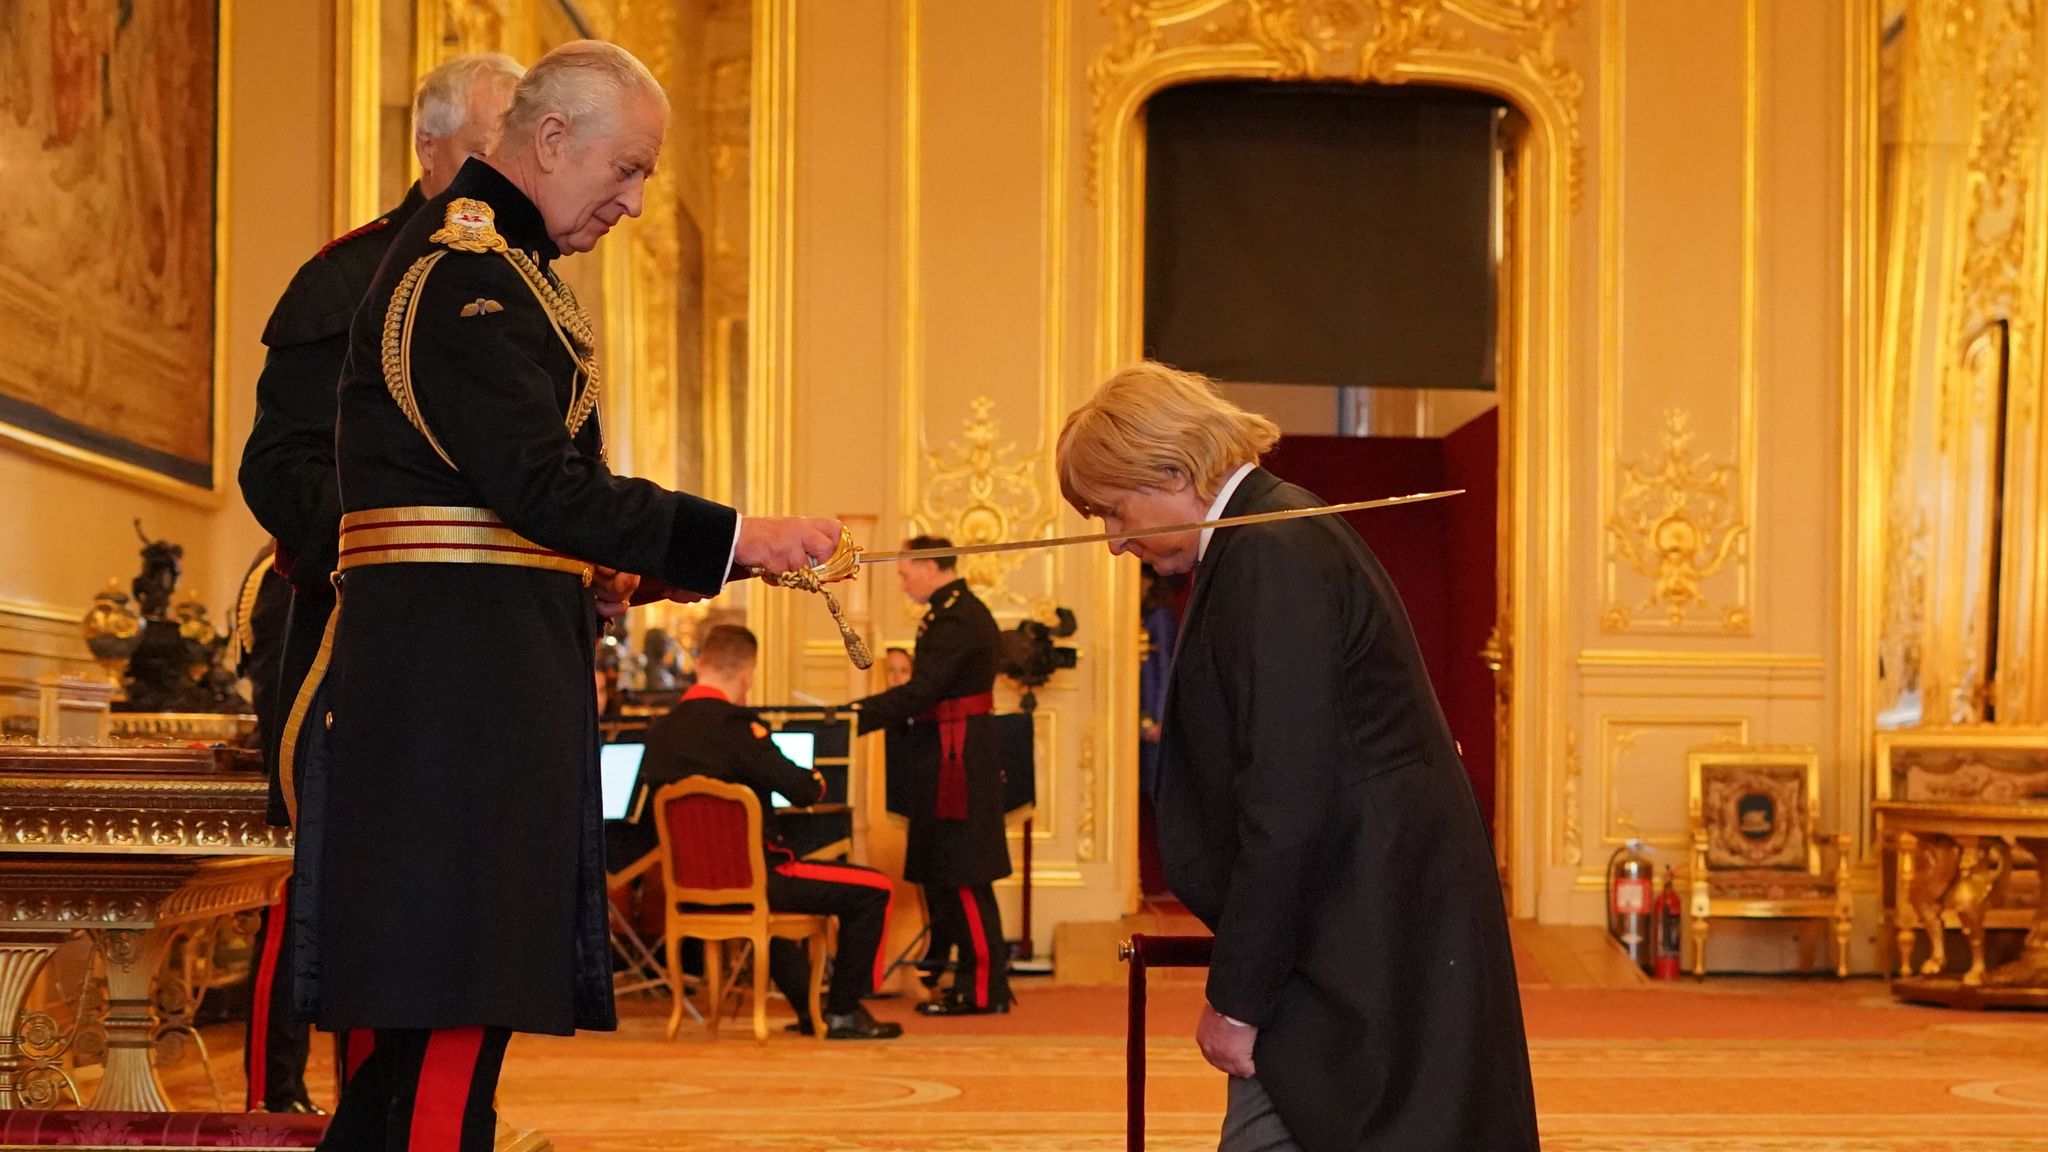 Sir Michael Fabricant, Member of Parliament for Lichfield, is made a Knight Bachelor by King Charles III at Windsor Castle, Berkshire. The honour recognises political and public service. Picture date: Tuesday December 12, 2023. PA Photo. See PA story ROYAL Investiture. Photo credit should read: Jonathan Brady/PA Wire